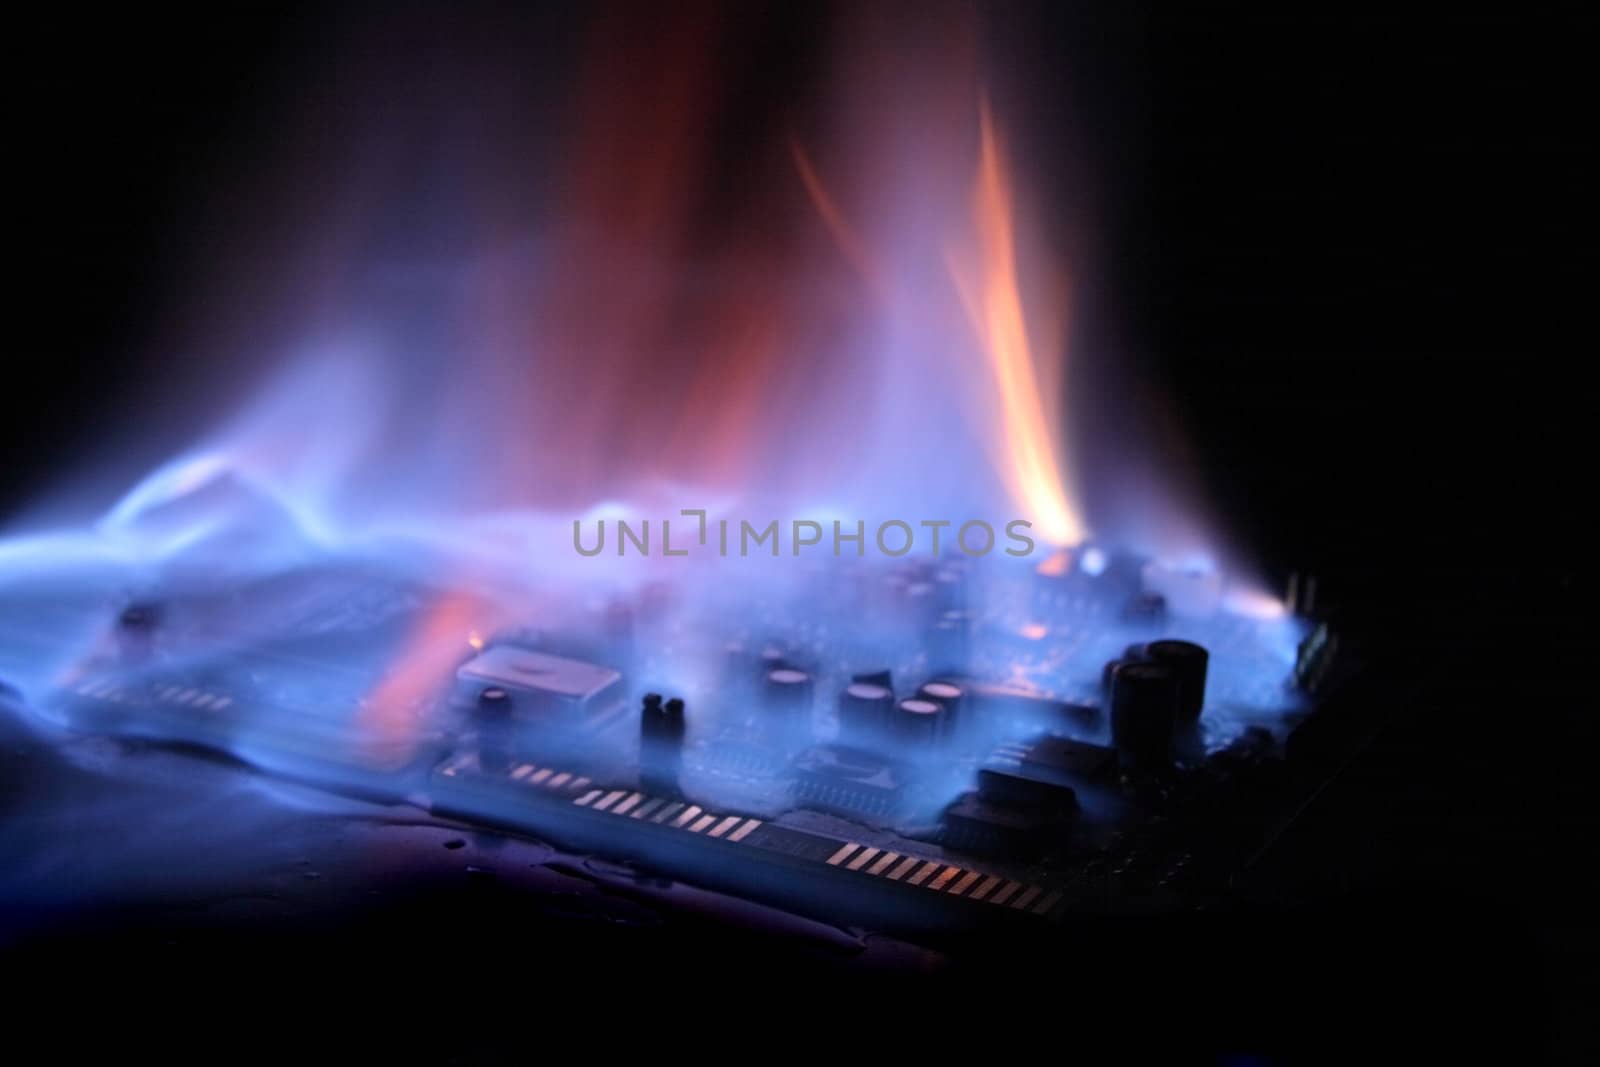 soundcard in the fire on the black background